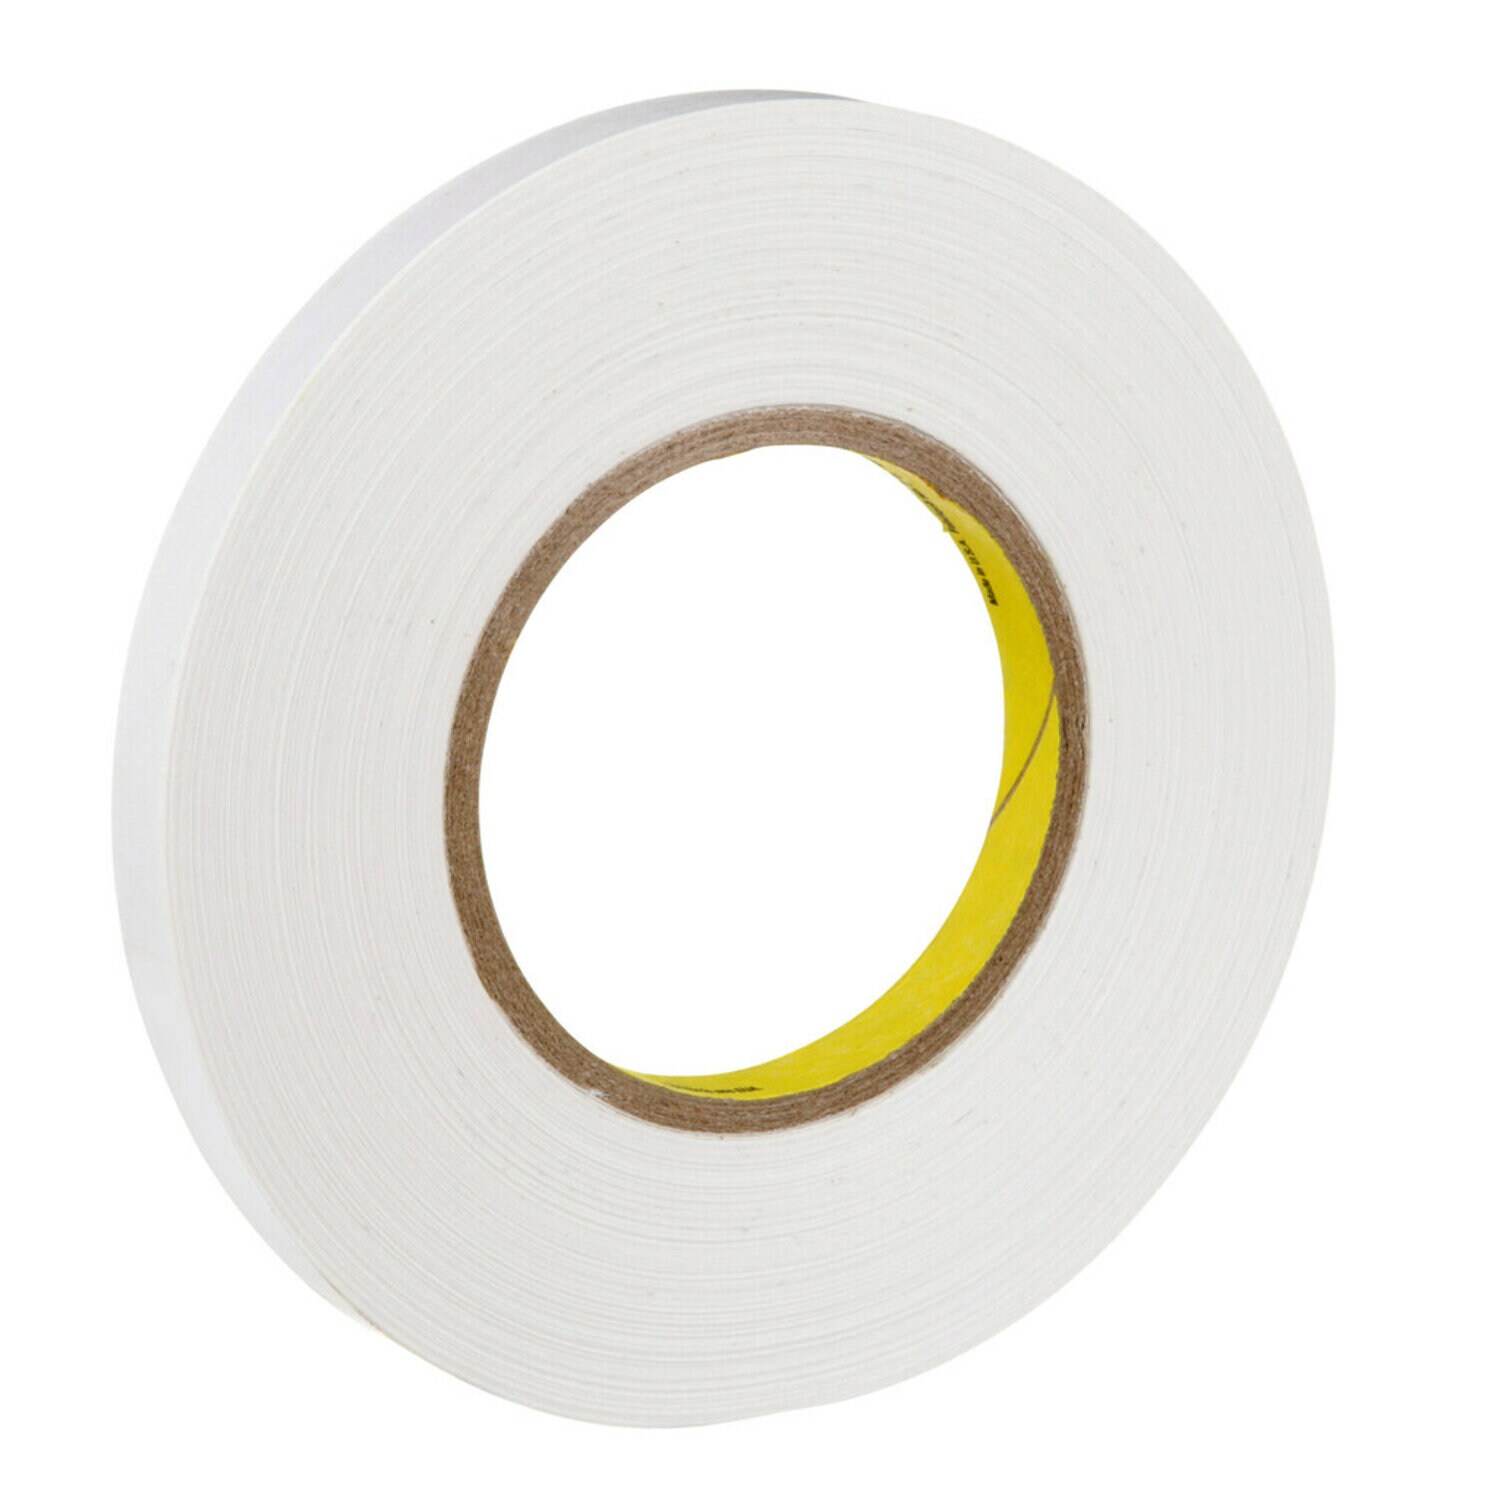 7000123423 - 3M Removable Repositionable Tape 9416, White, 1/2 in x 72 yd, 2.6 mil,
72 rolls per case